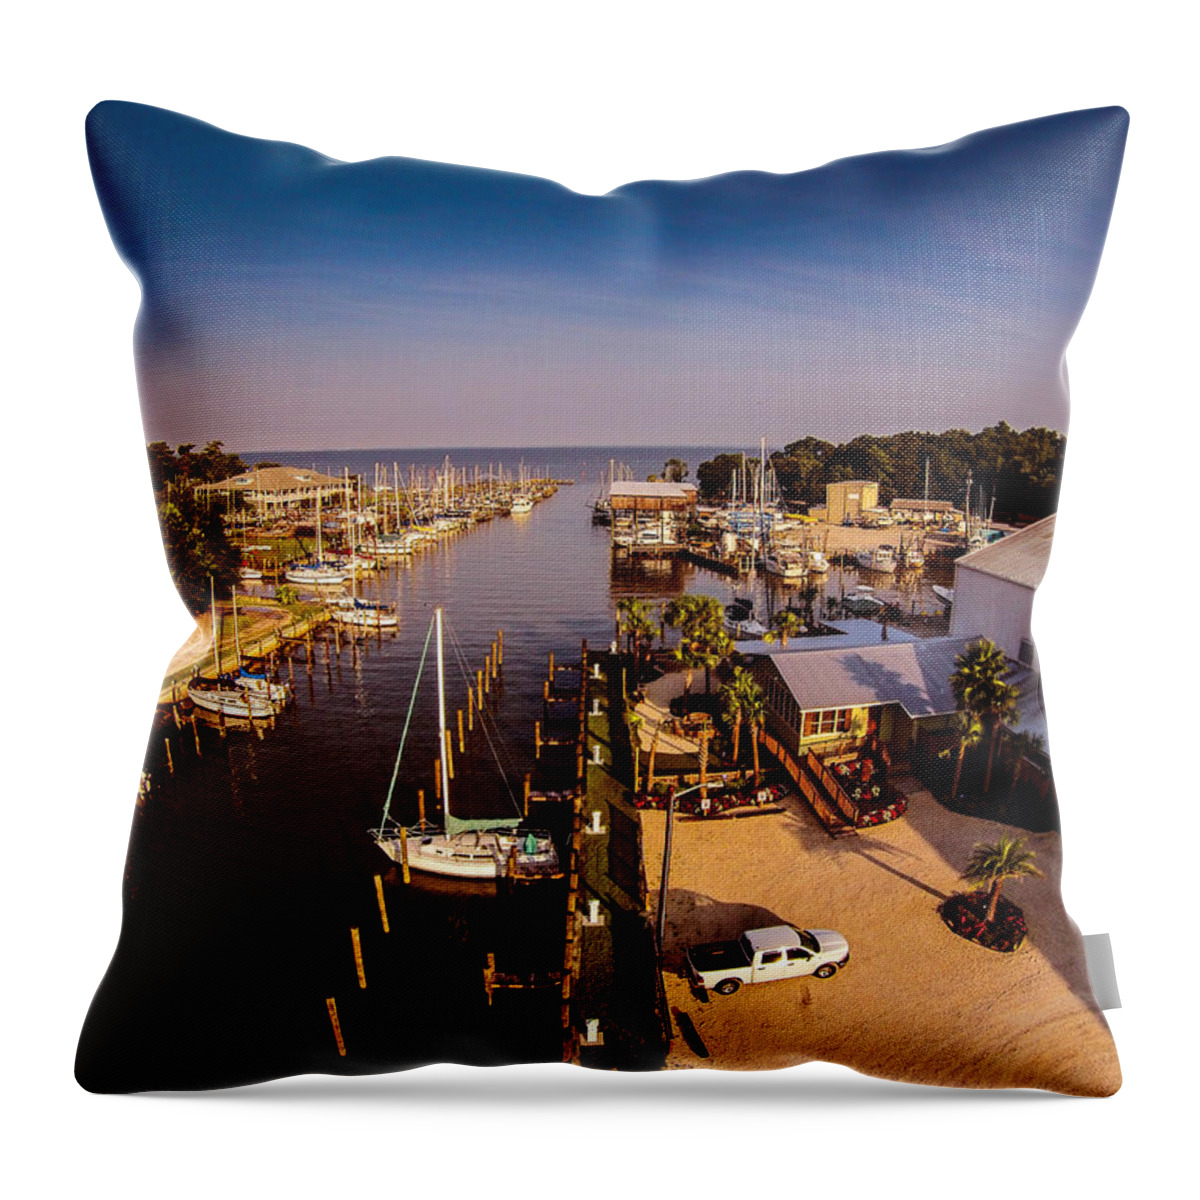 Yacht Club Throw Pillow featuring the photograph Fairhope Yacht Club Harbor by Michael Thomas